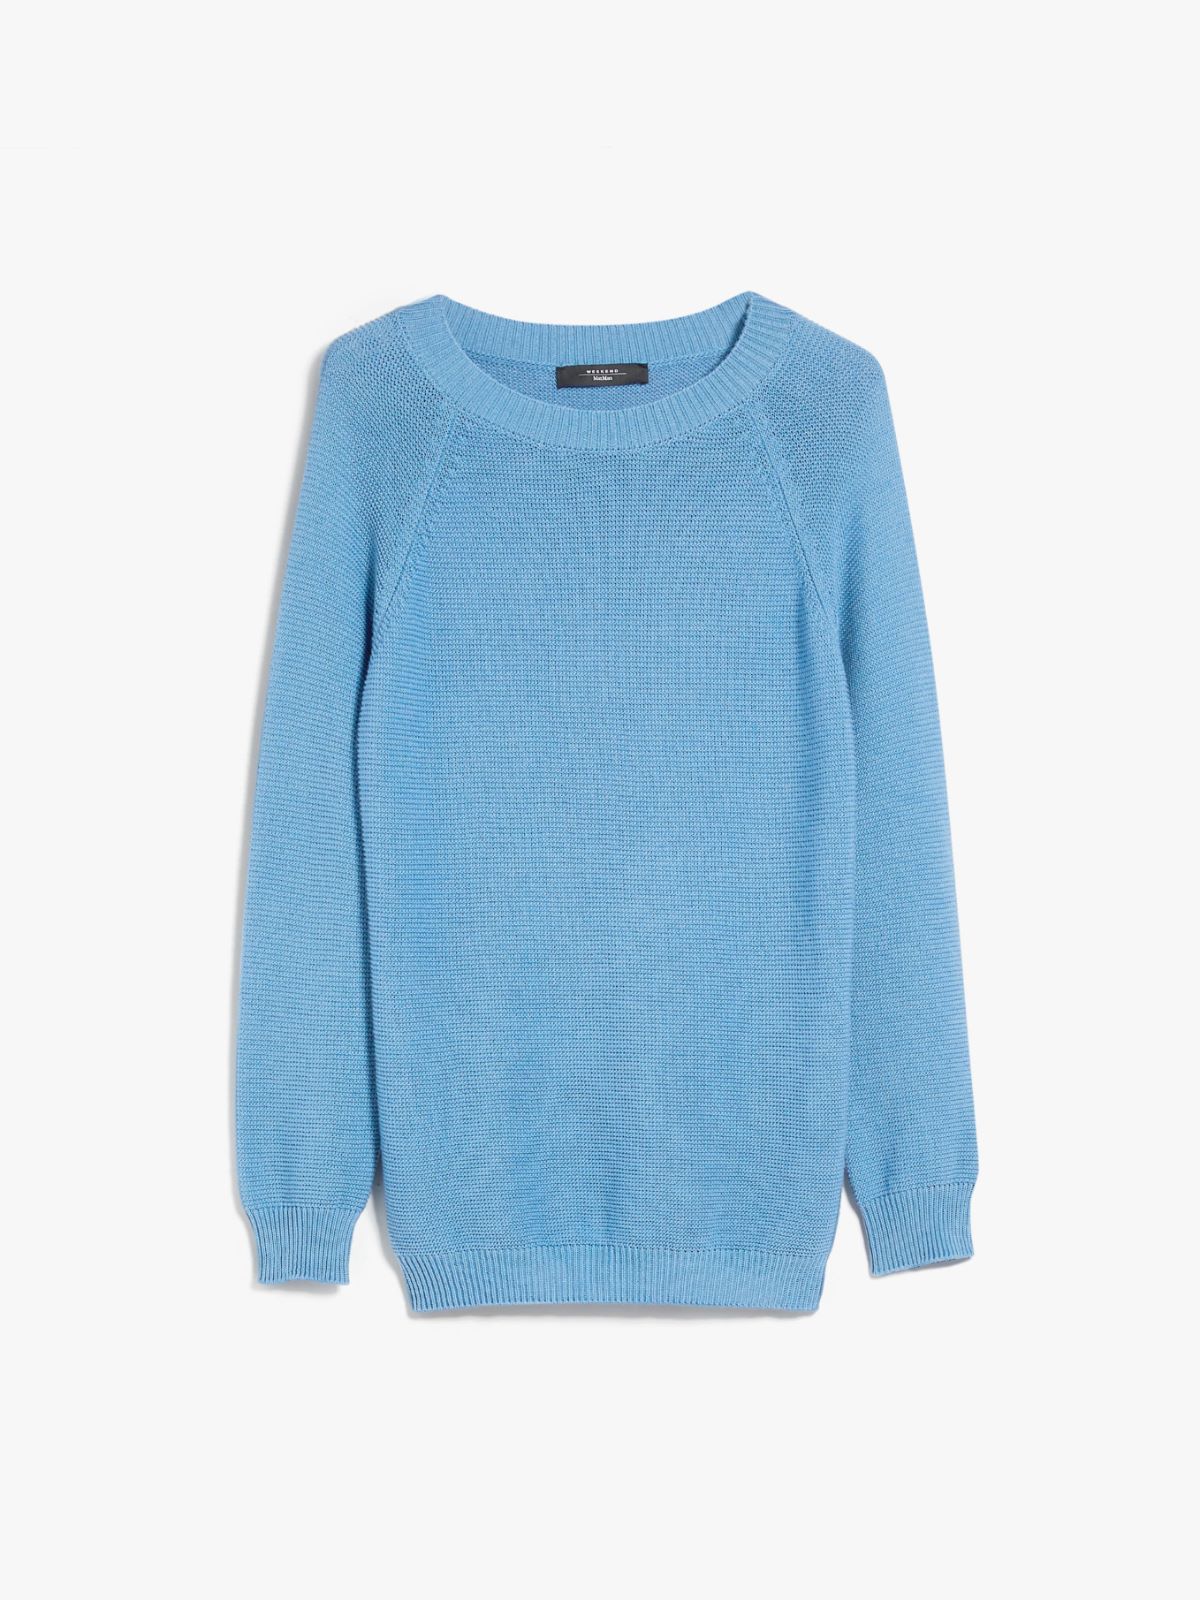 Relaxed-fit cotton sweater - SKY BLUE - Weekend Max Mara - 6